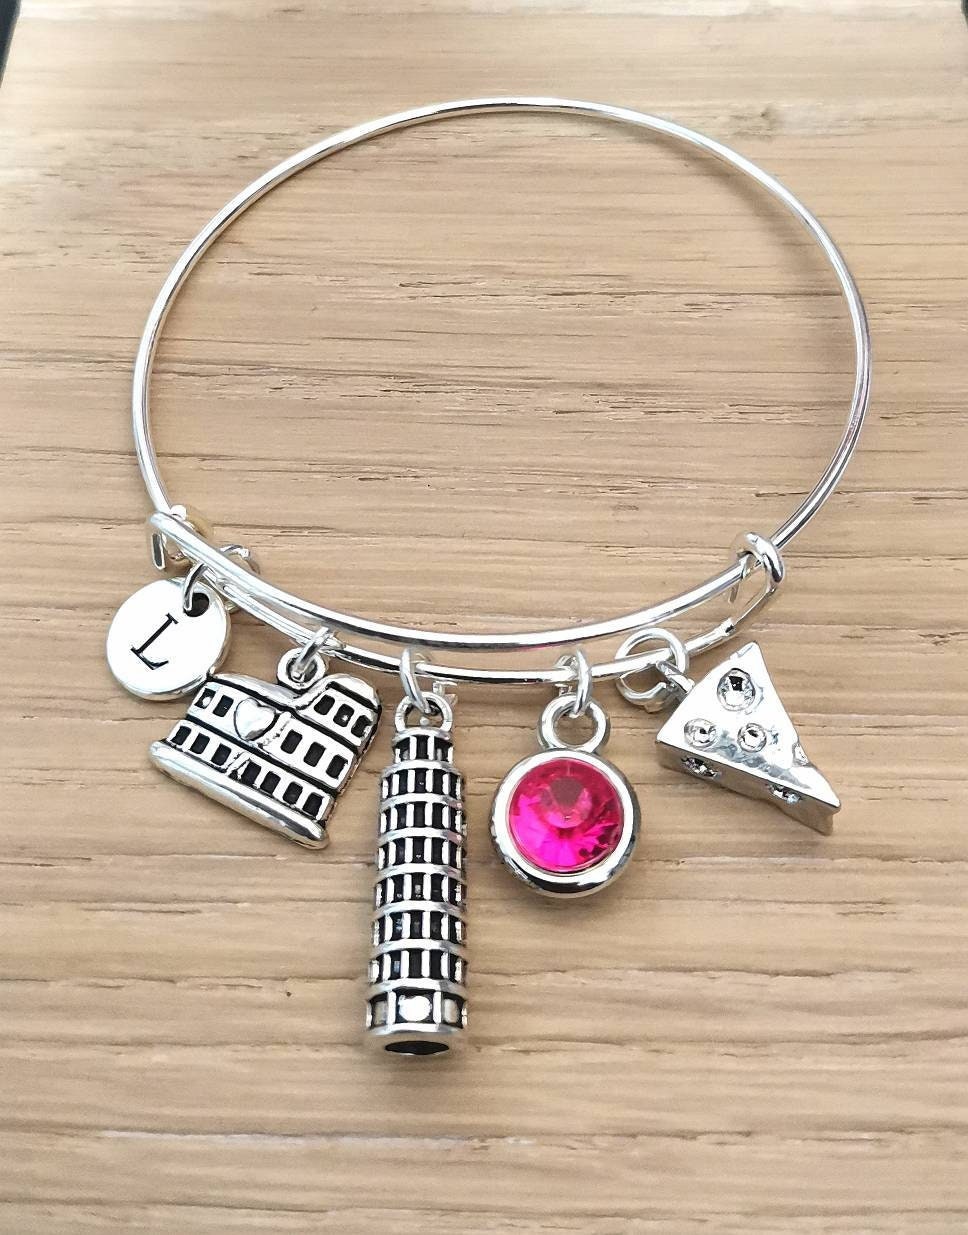 Italy Bracelet, Italy gifts , Italy jewelry, Italy Keyring, Gift for Italian, Italian gifts, Cheese, Rome, Colosseum, Tower of Pisa, Roman